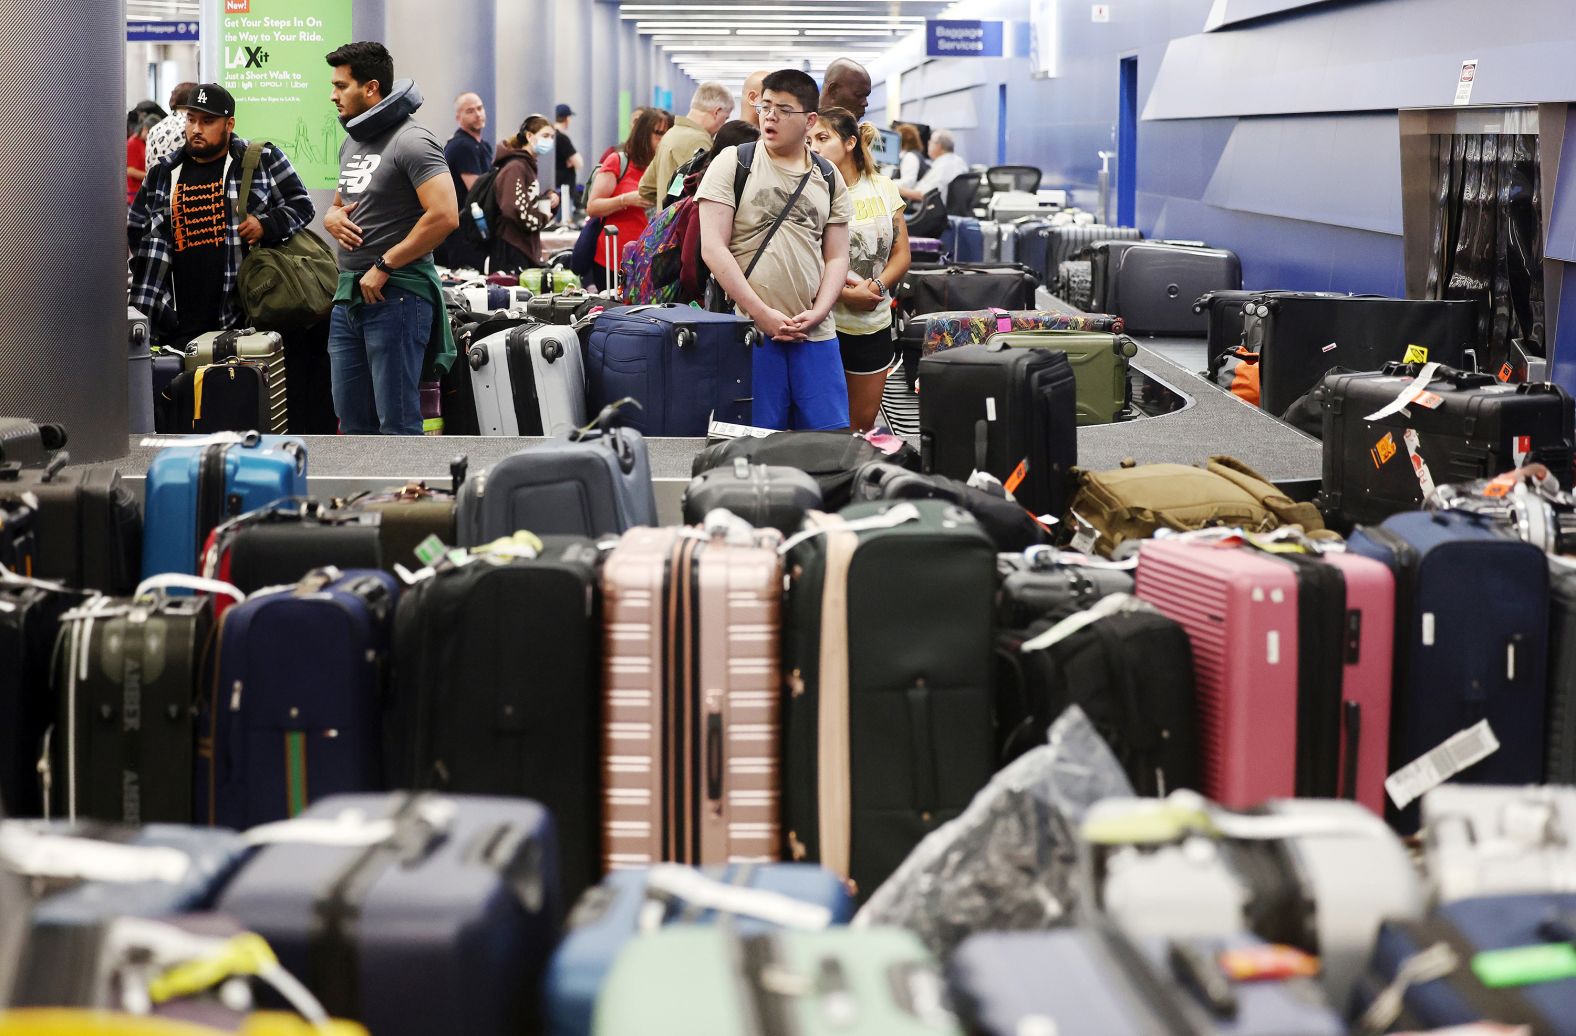 Travelers wait for their bags Thursday amid rows of luggage at Los Angeles International Airport.